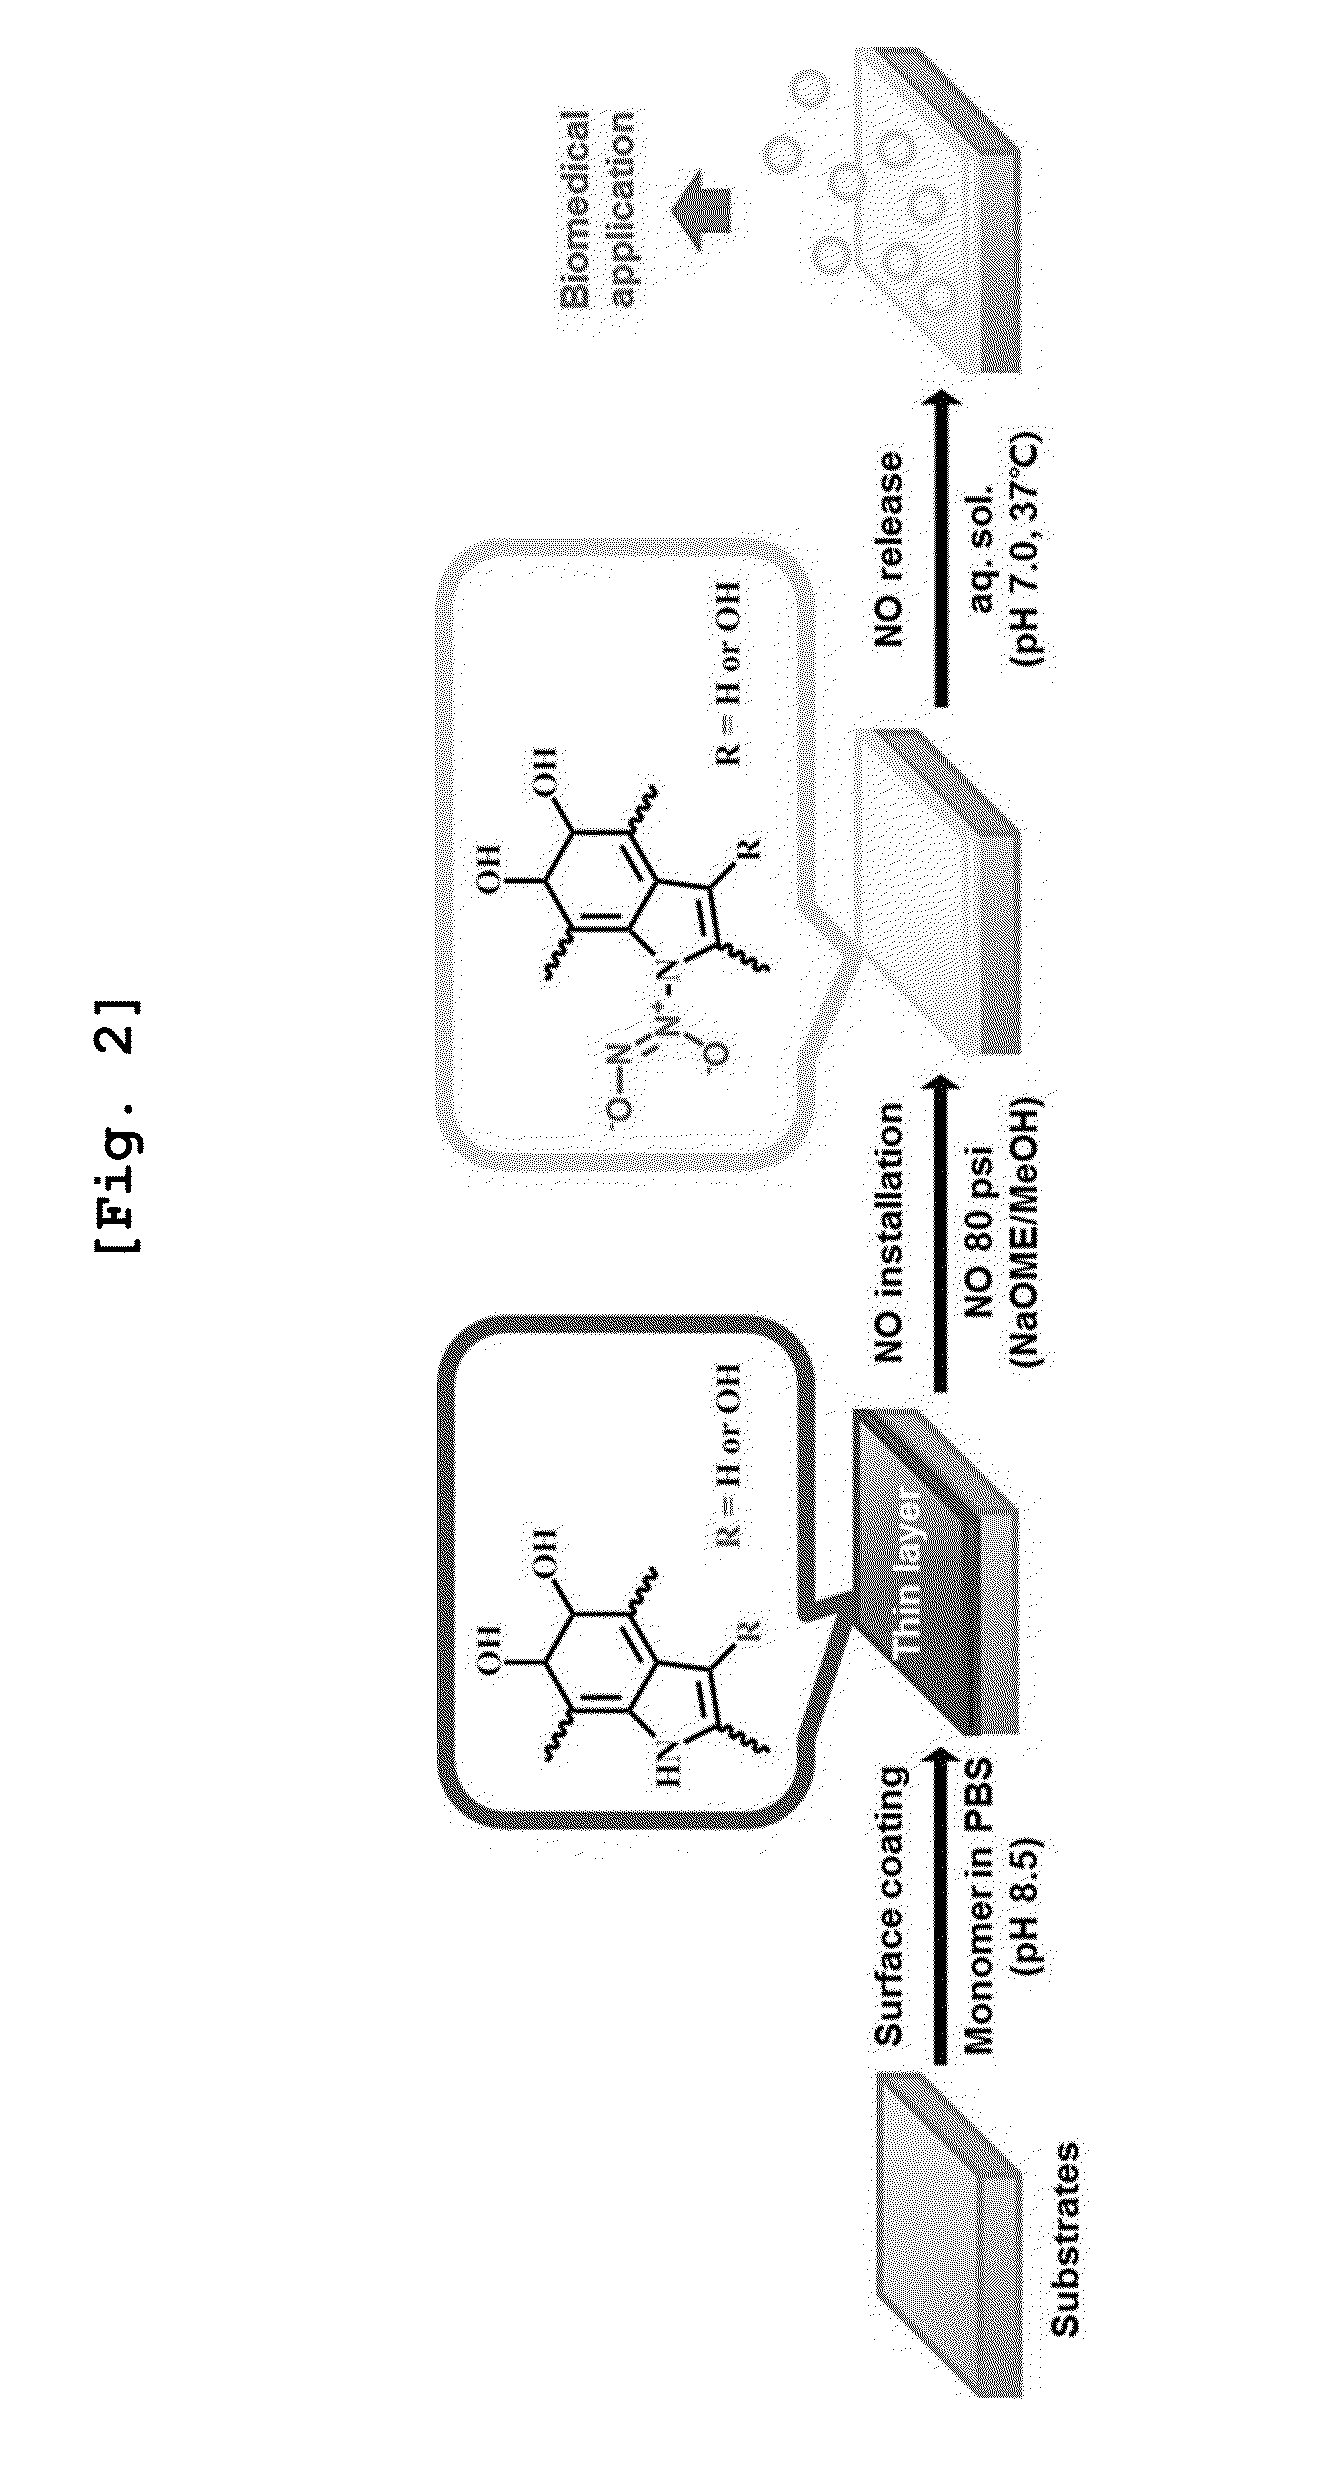 Method of preparing coating film containing nitrogen monoxide on surface of material using catecholamine